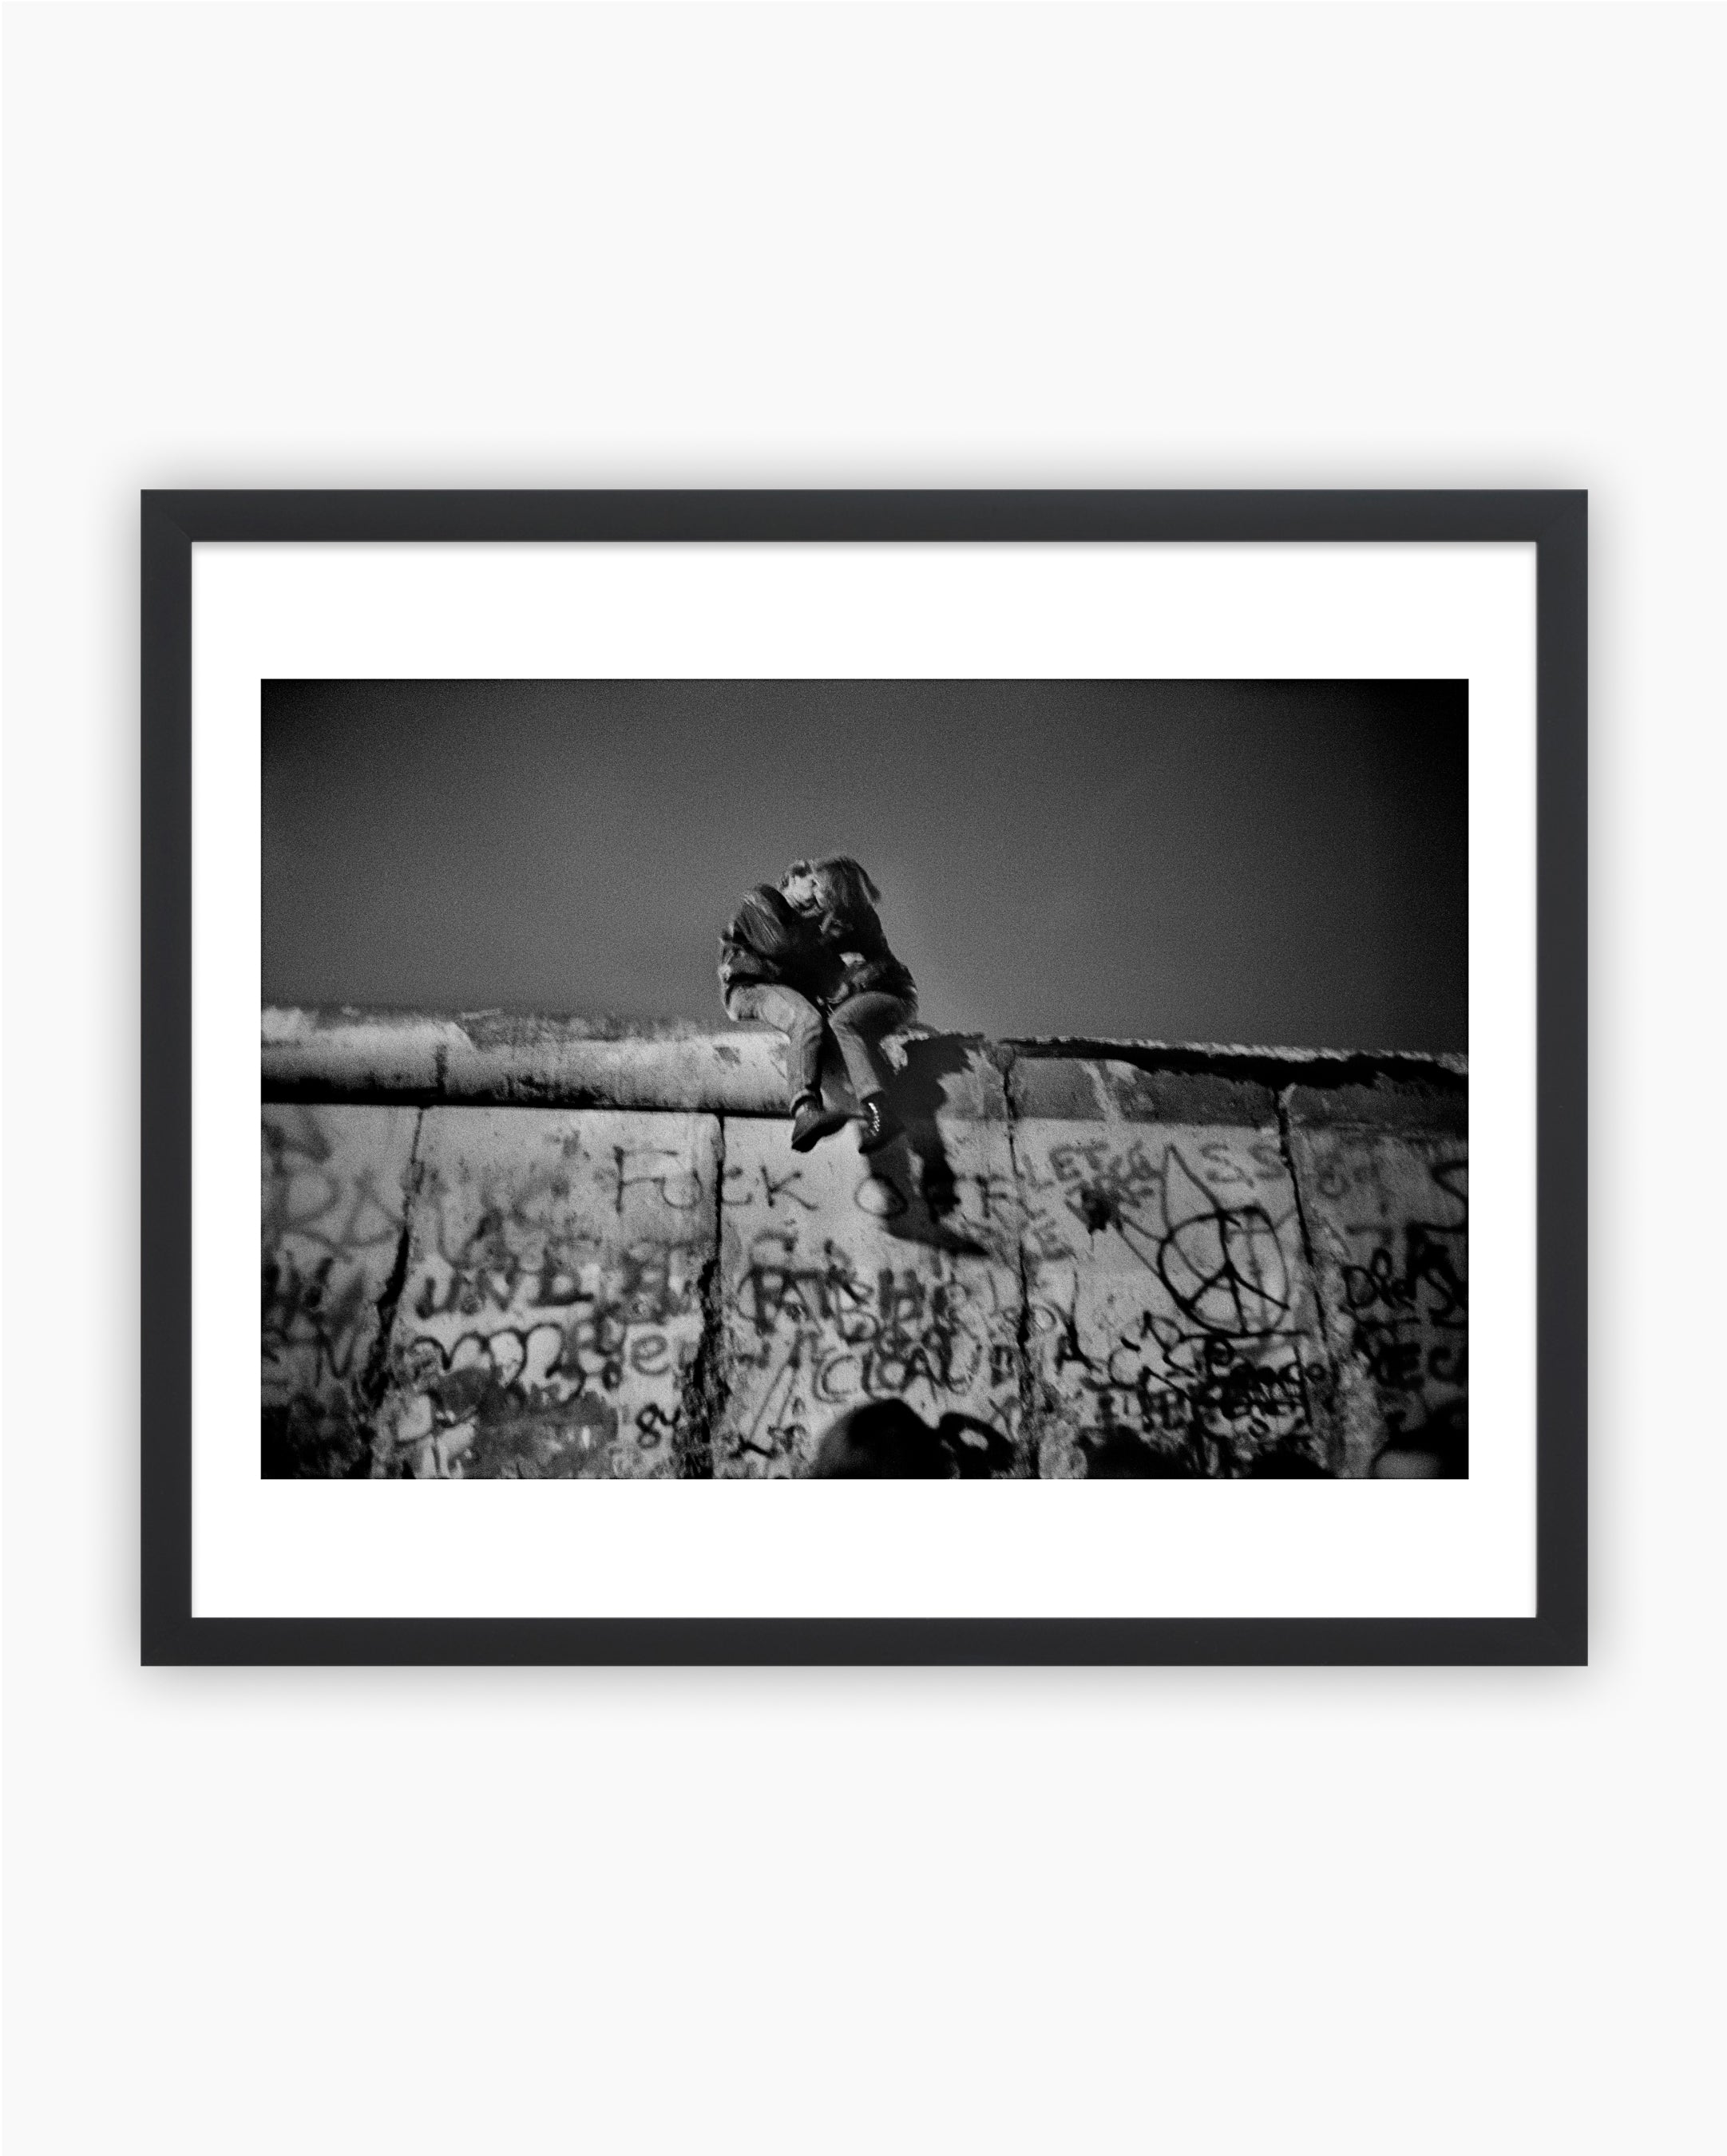 Magnum Editions: Berlin, Germany after the fall of the wall on Sunday, 31 December, 1989